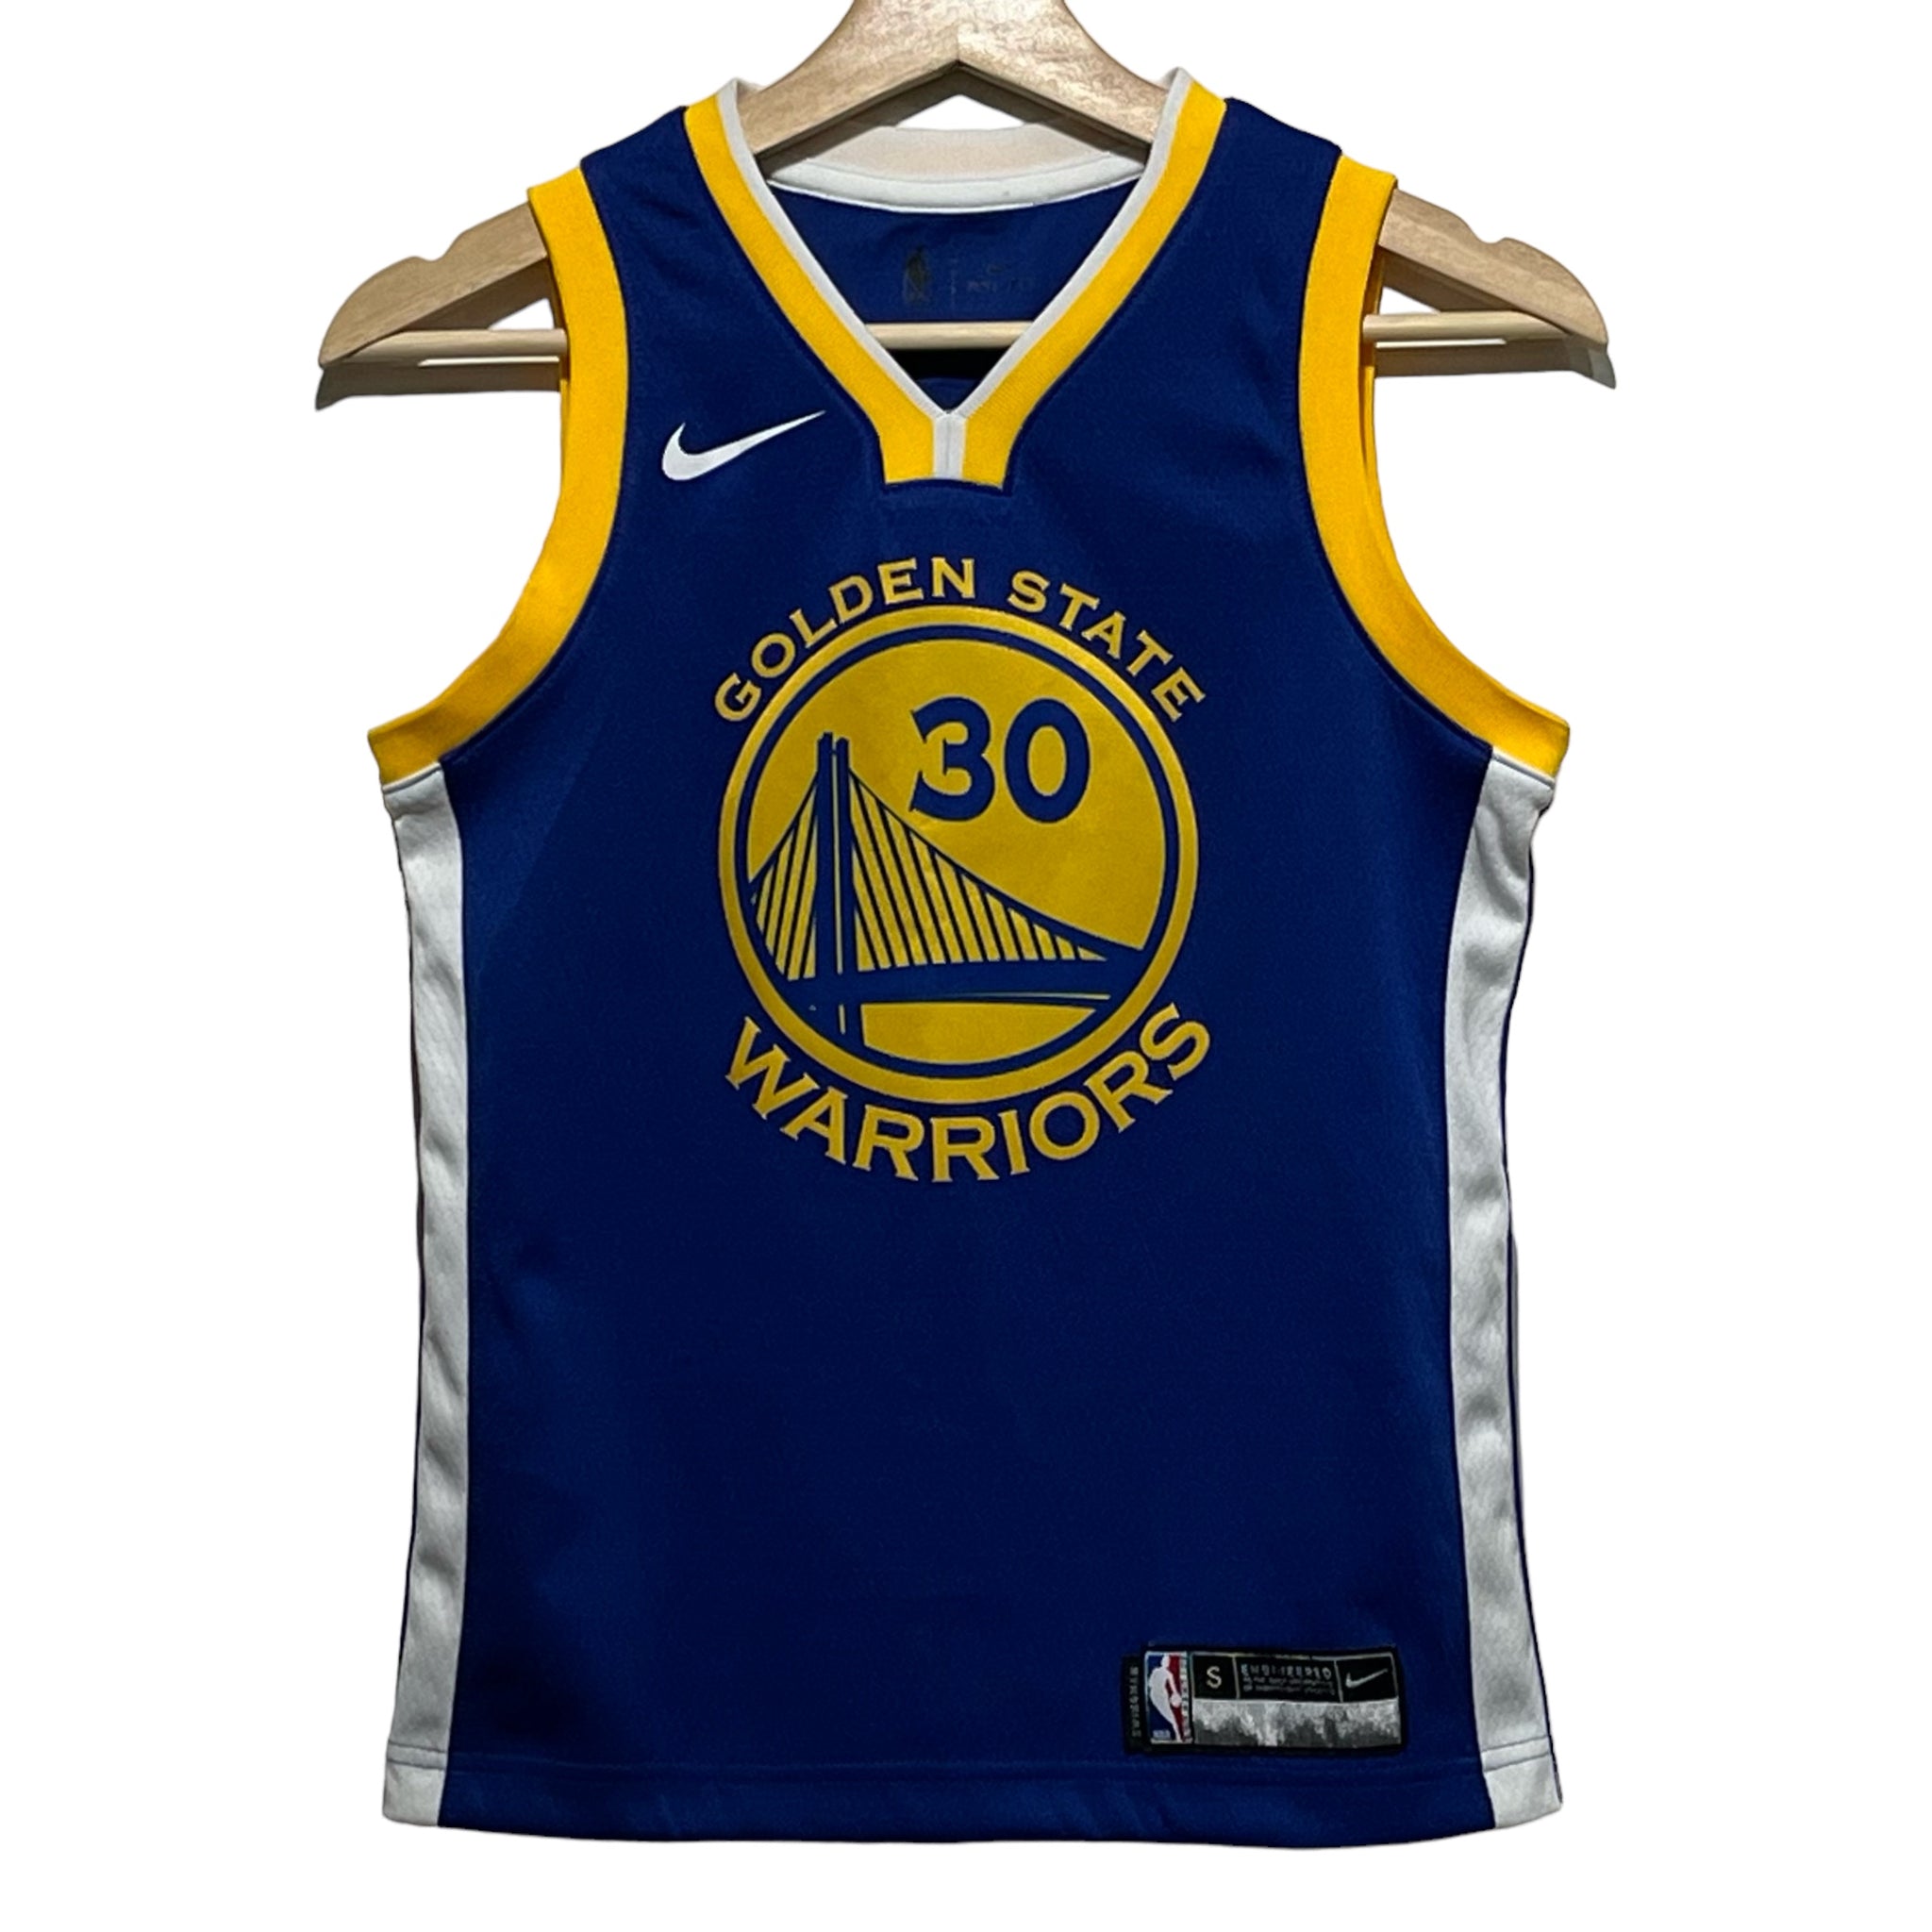 Stephen Curry Golden State Warriors Youth Swingman Basketball